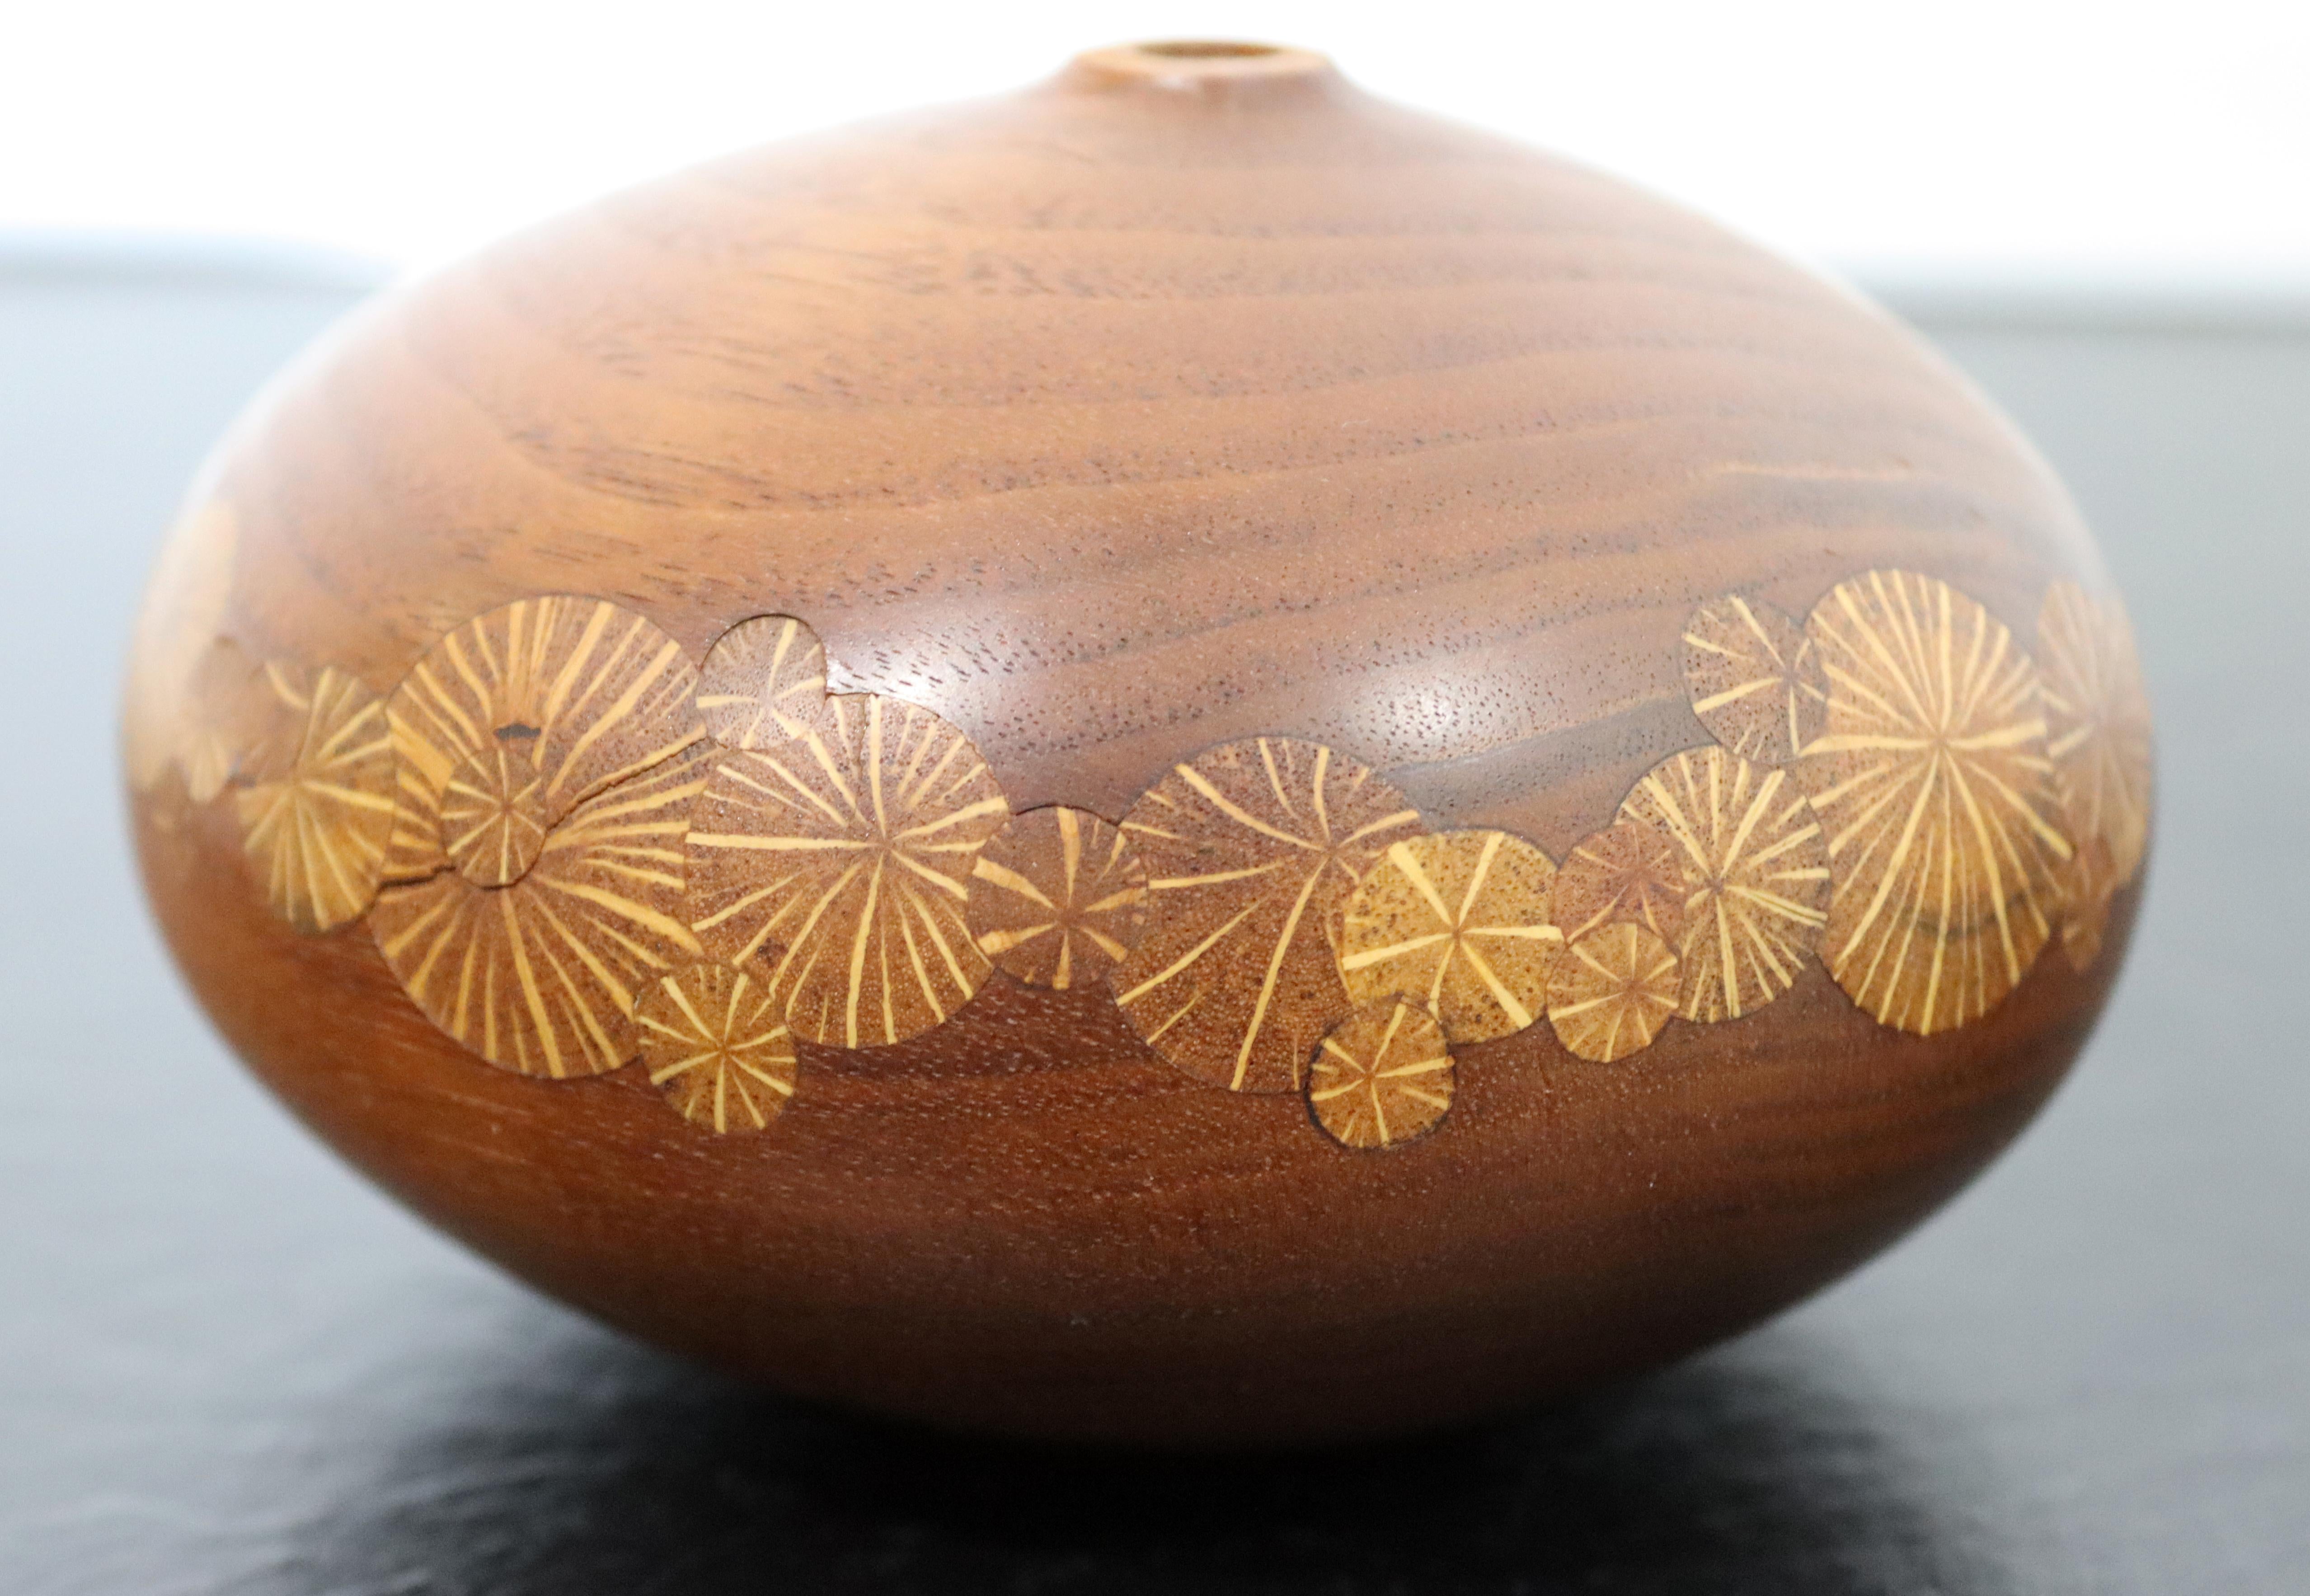 Late 20th Century Mid-Century Modern Pair Wood Vessels Floral Engraved Design Signed Roger Sloan